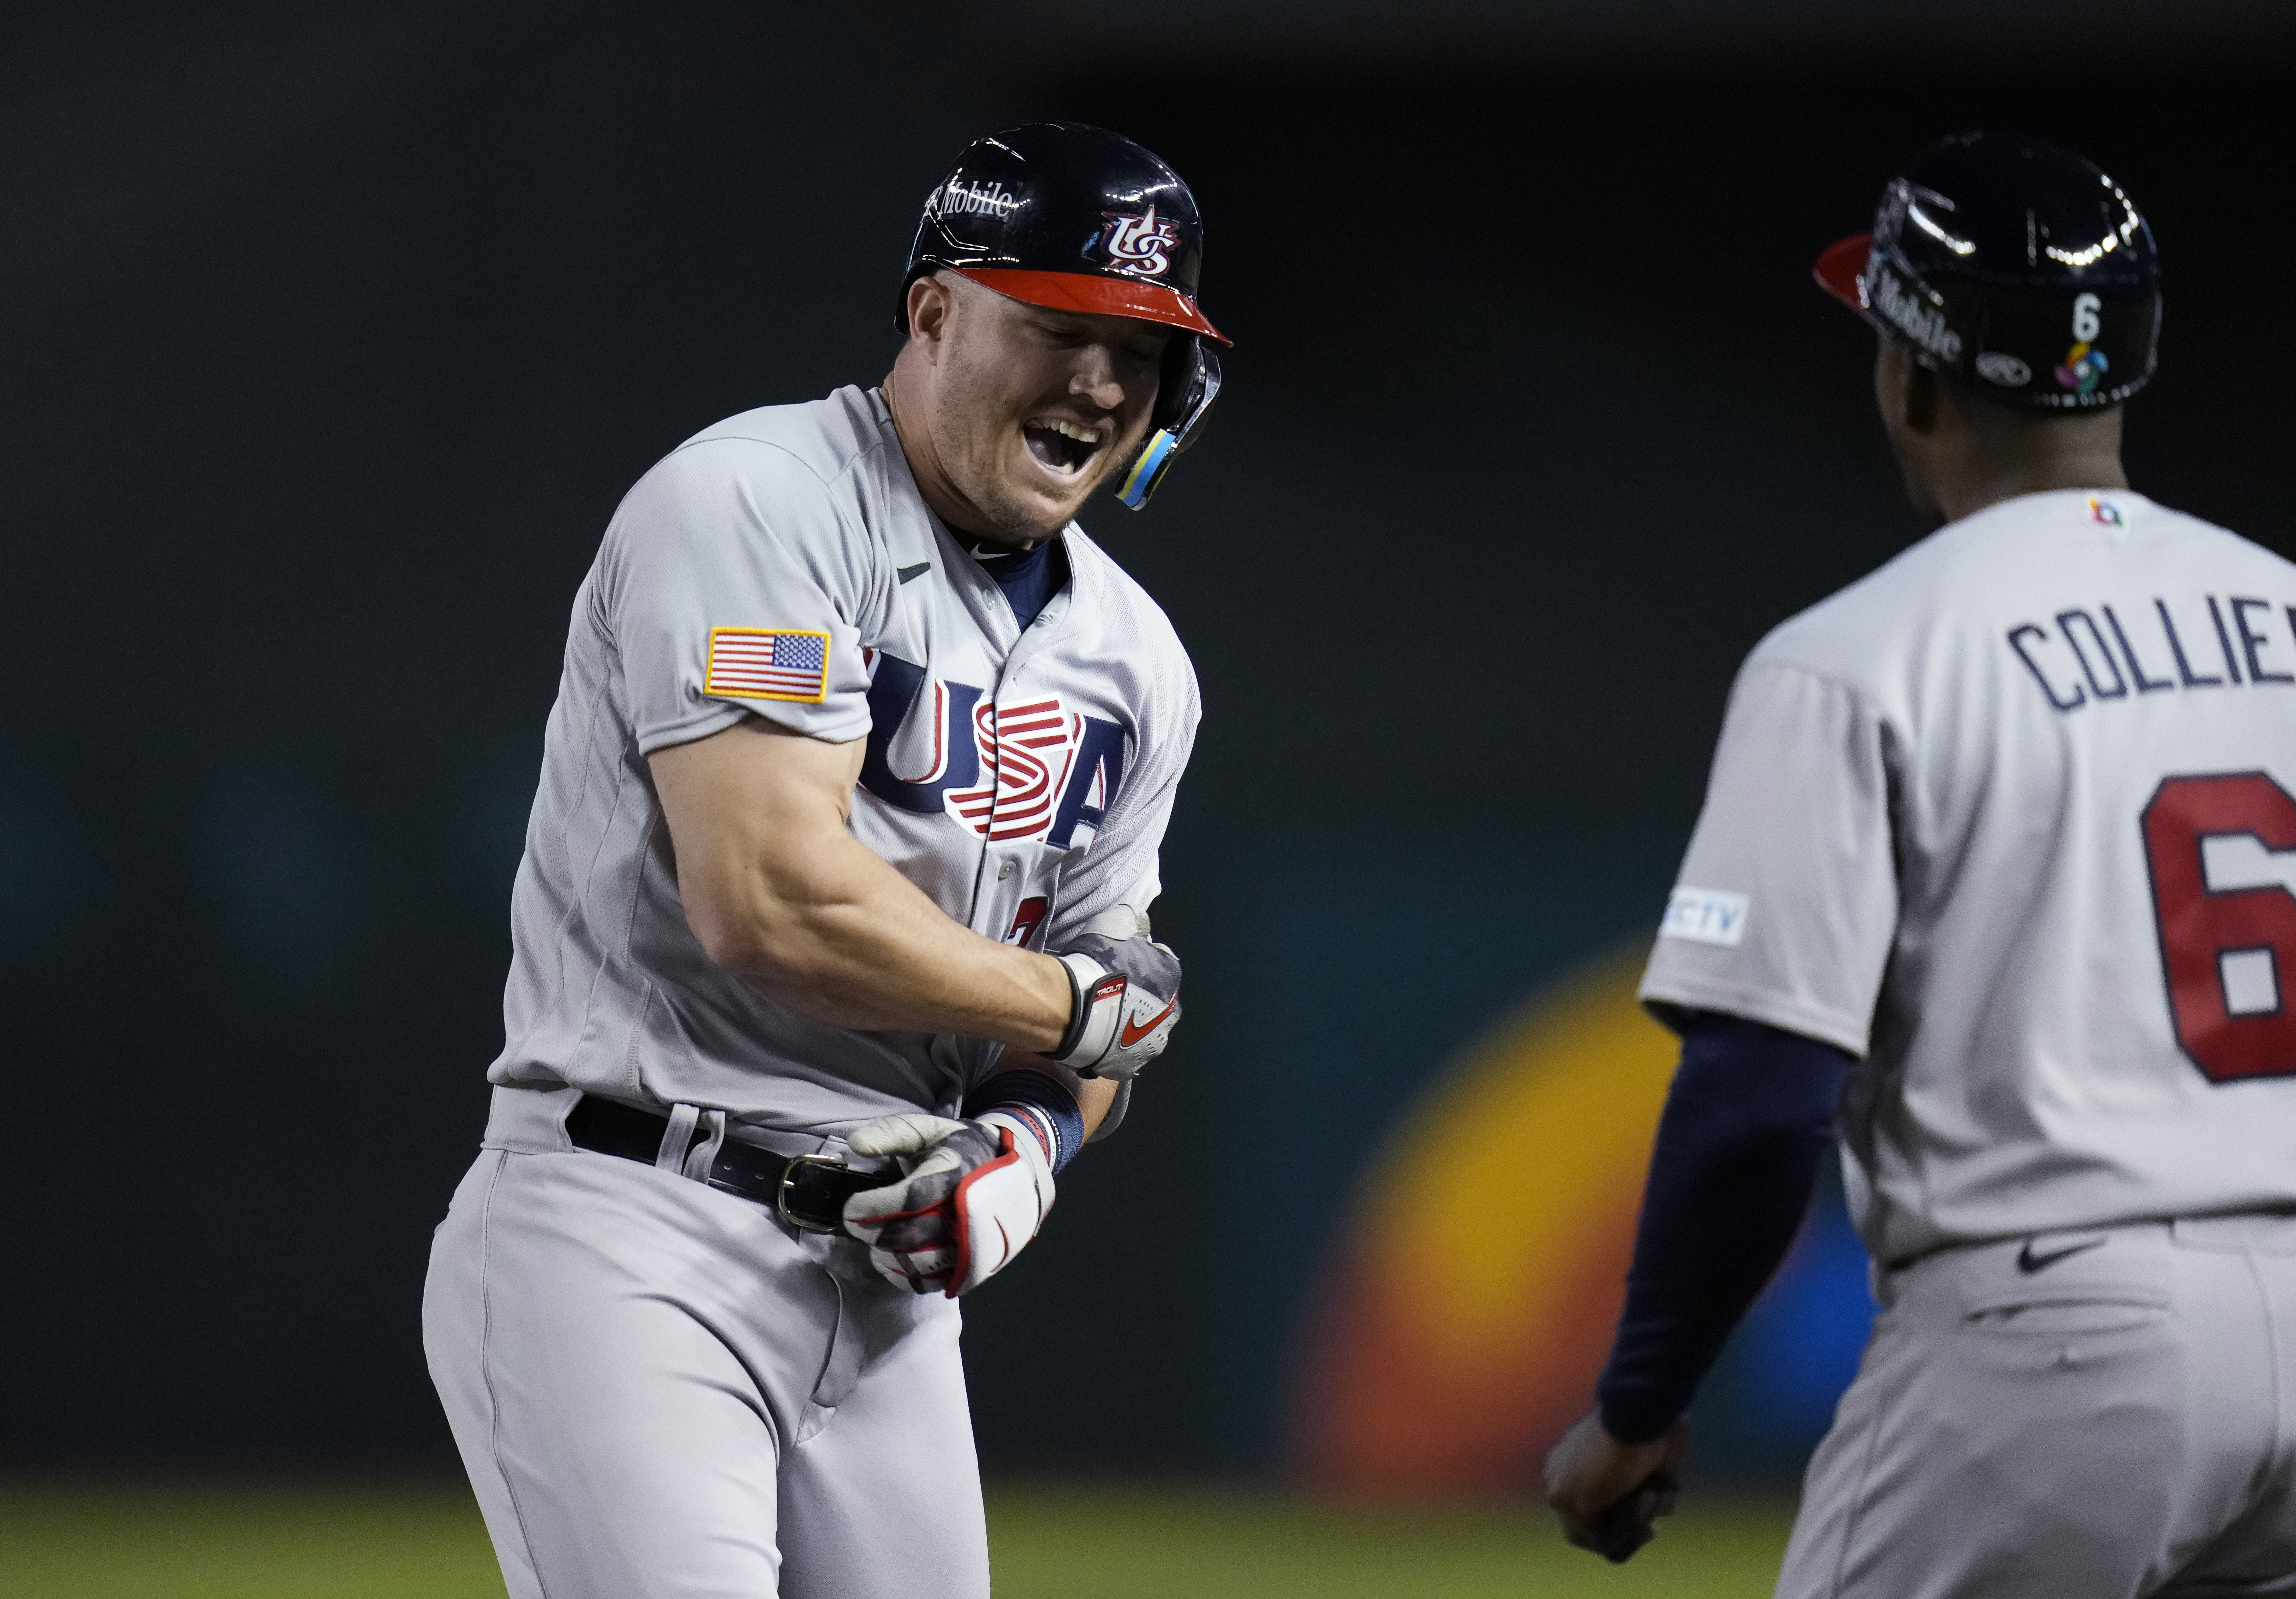 Japan defeats the United States in World Baseball Classic championship